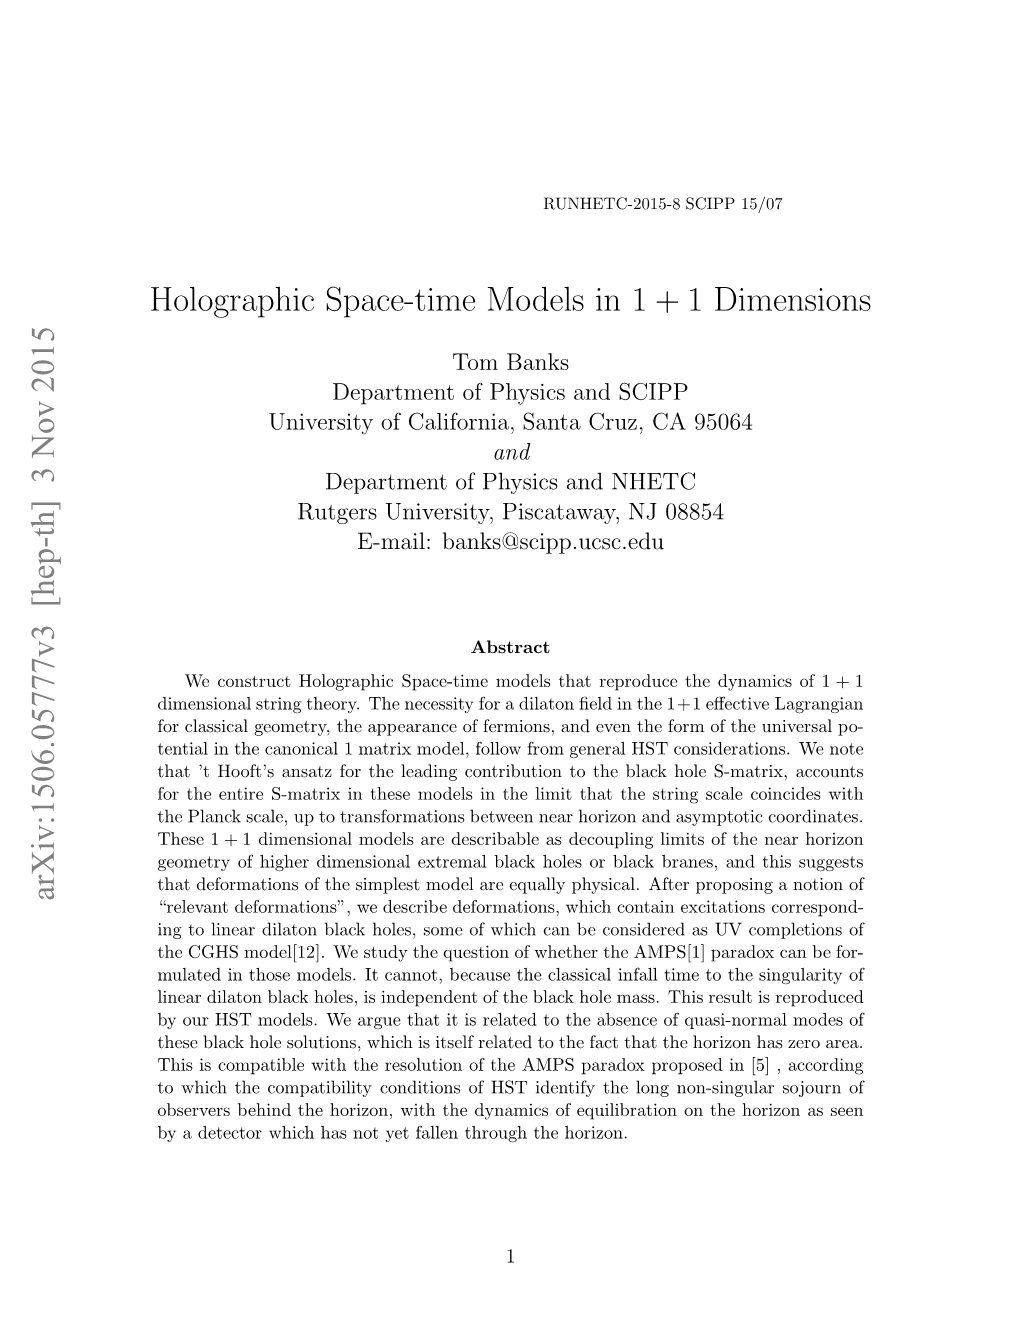 Holographic Space-Time Models in $1+ 1$ Dimensions